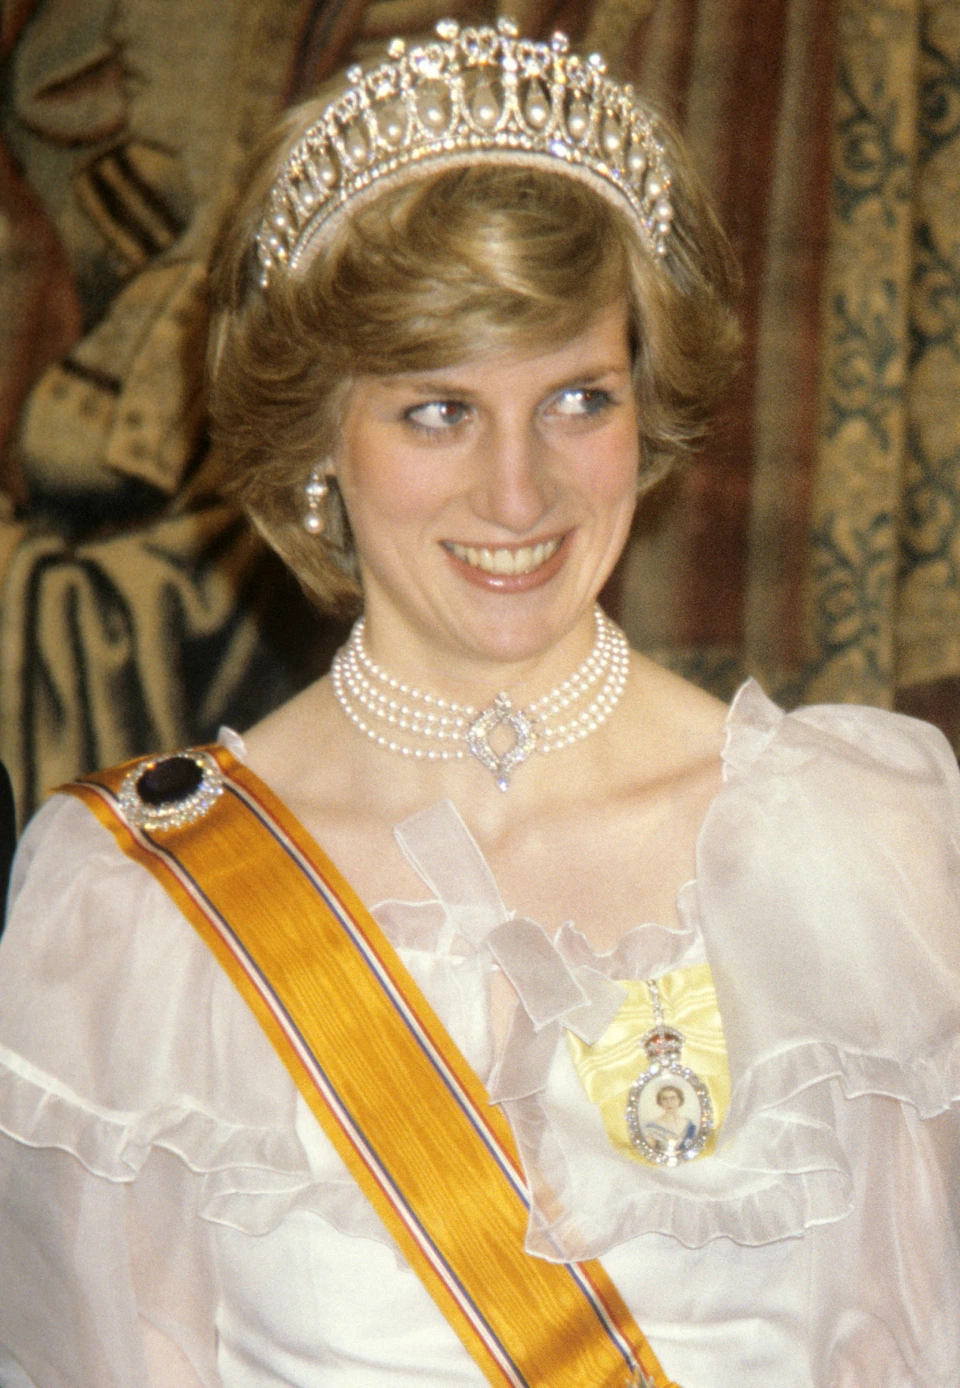 Prince William has been paying a secret tribute to Diana under his suits & uniform for 30 years – have you seen it?